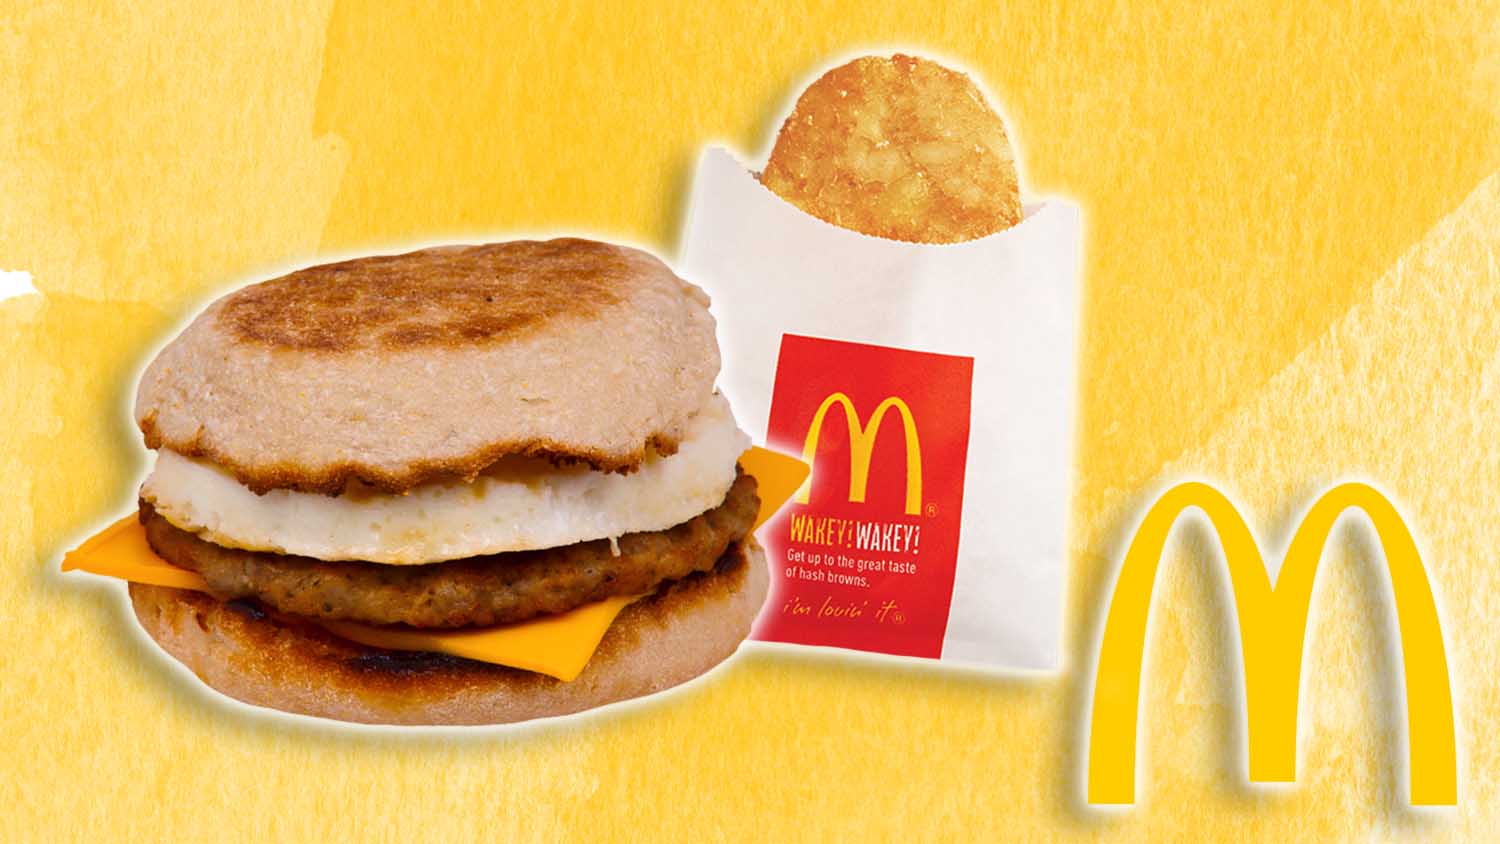 McDonald's Could Be About to Launch a Vegan Breakfast